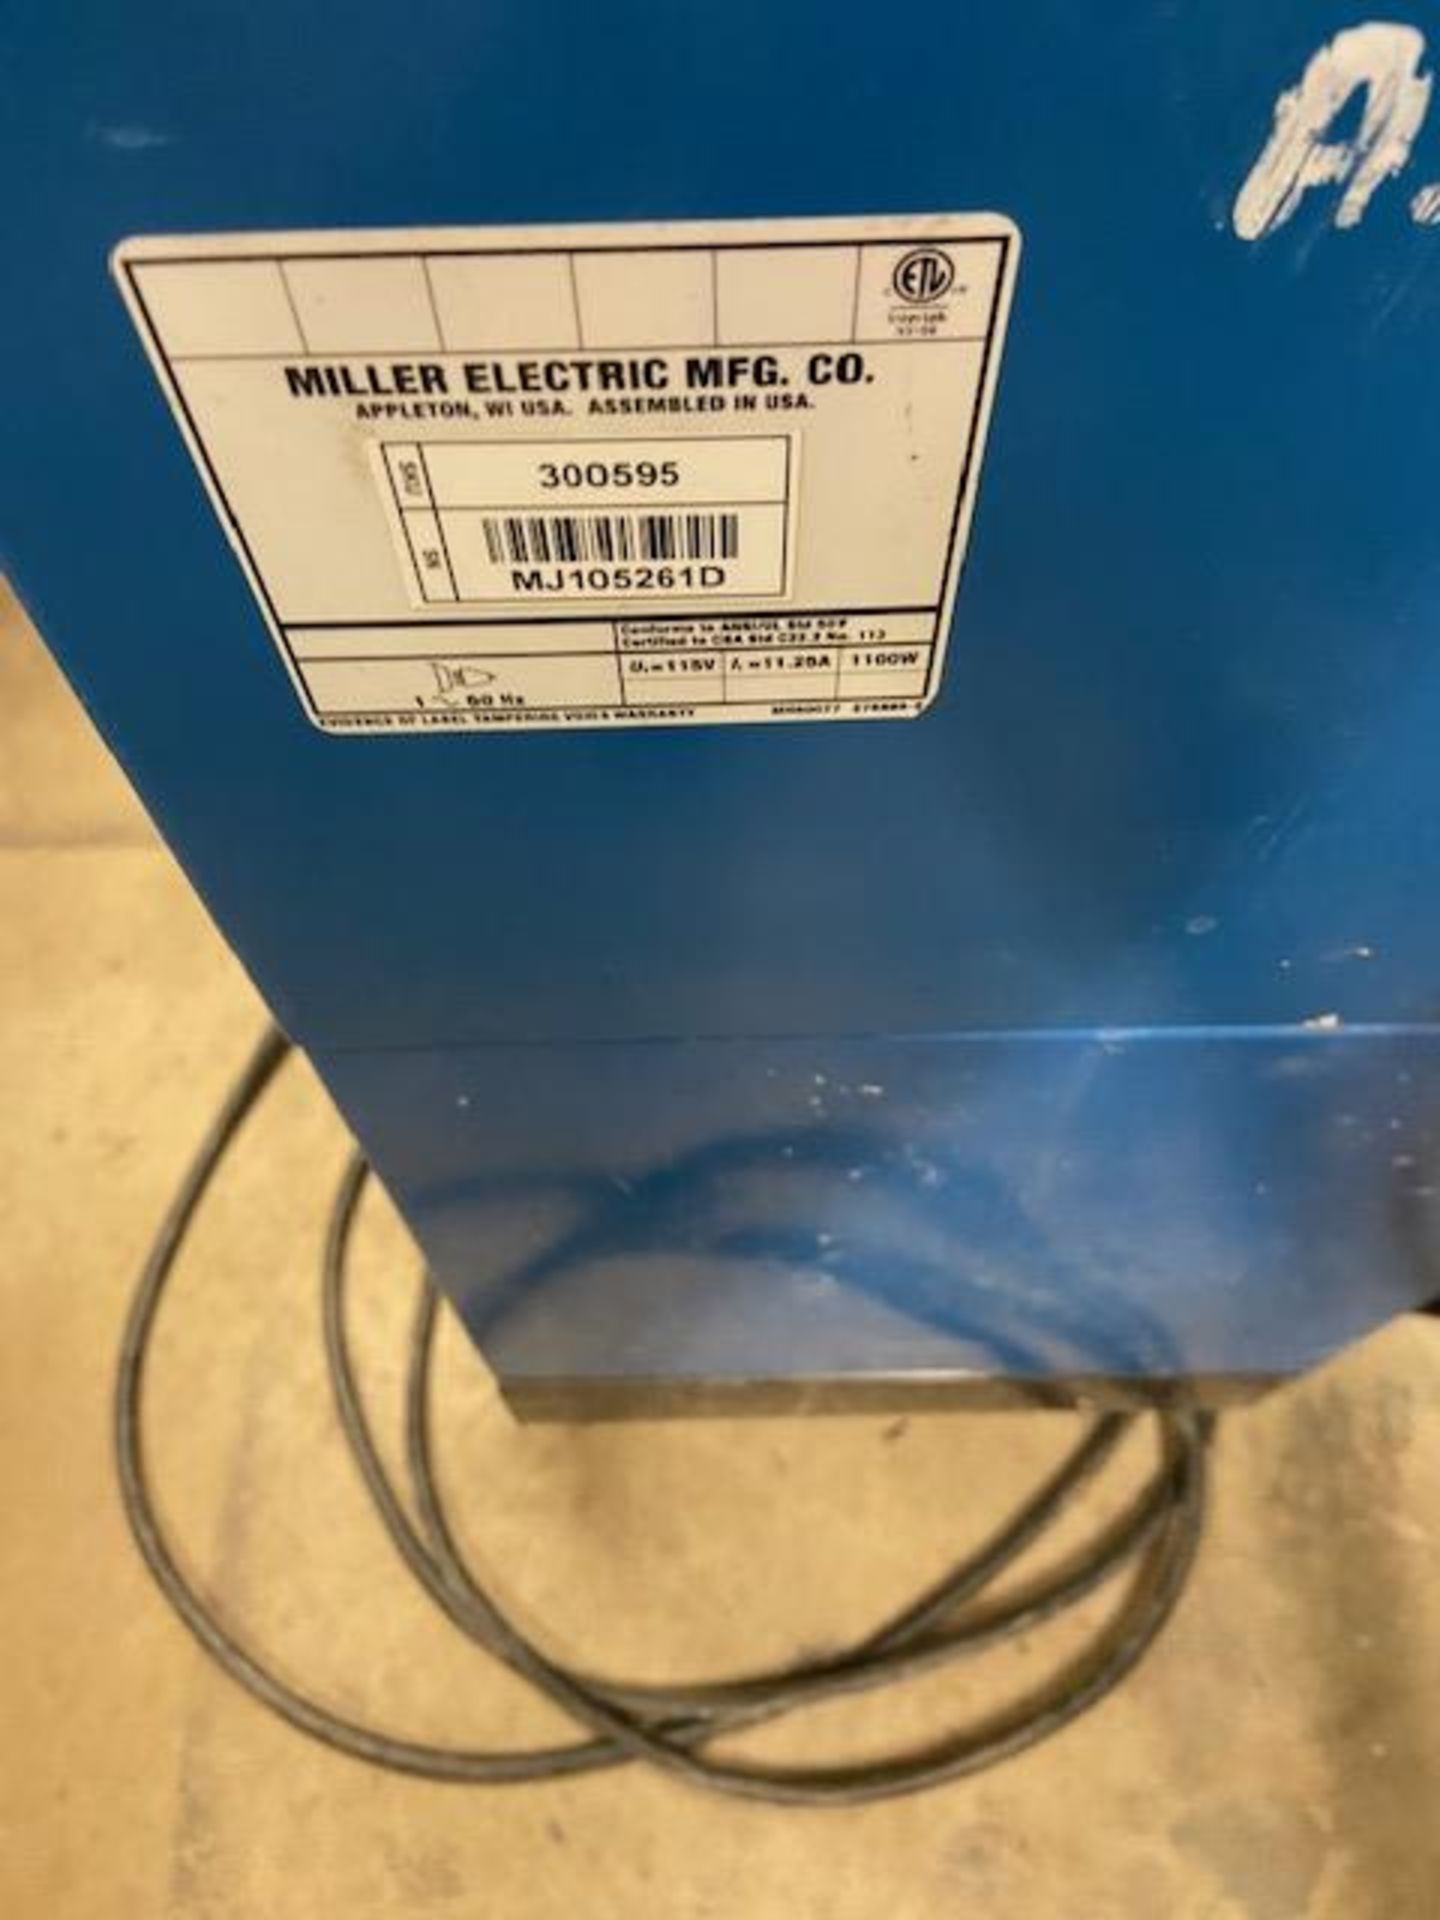 Miller Filtair 130 Fume Extractor (LOCATED IN MONROEVILLE, PA) - Image 6 of 8